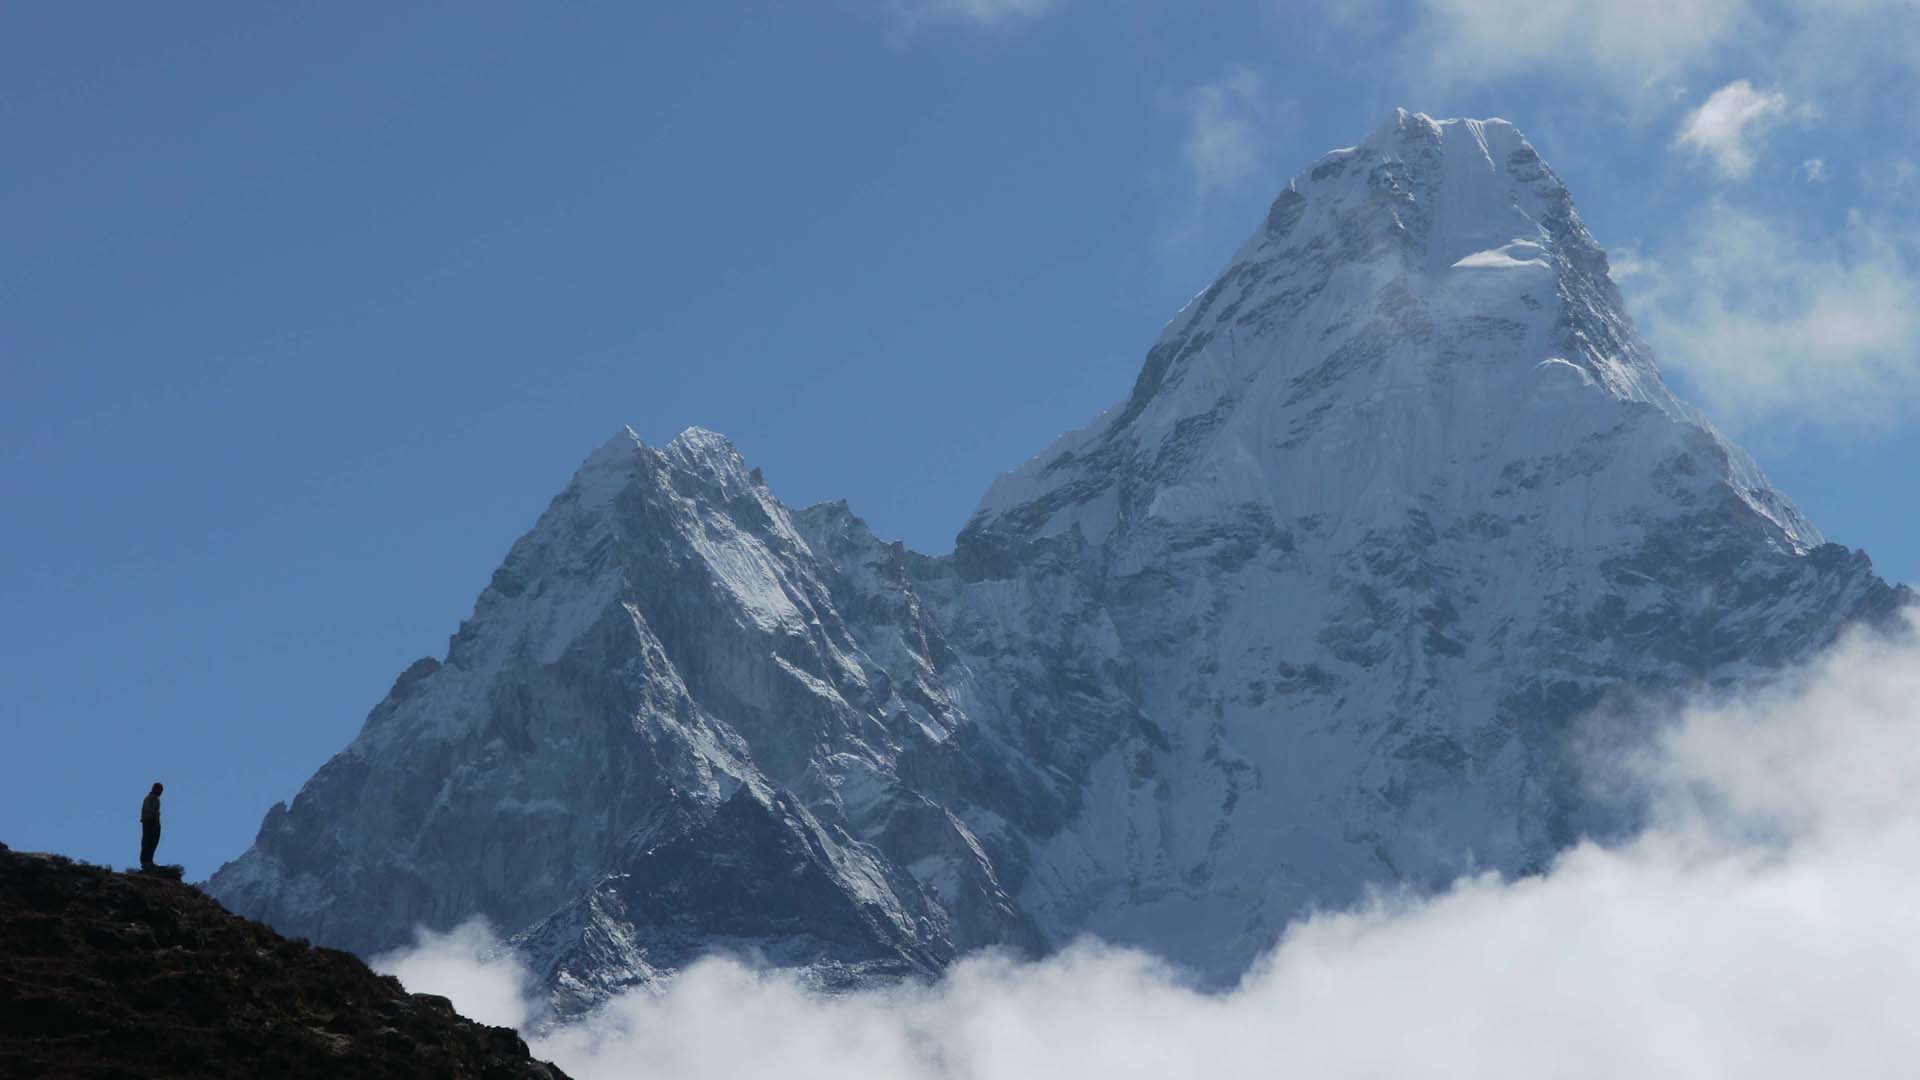 Quake -triggered avalanche on Mount Ama Dablam killed a sherpa and injured a British climber. Credit: MadisonMountaineering.com